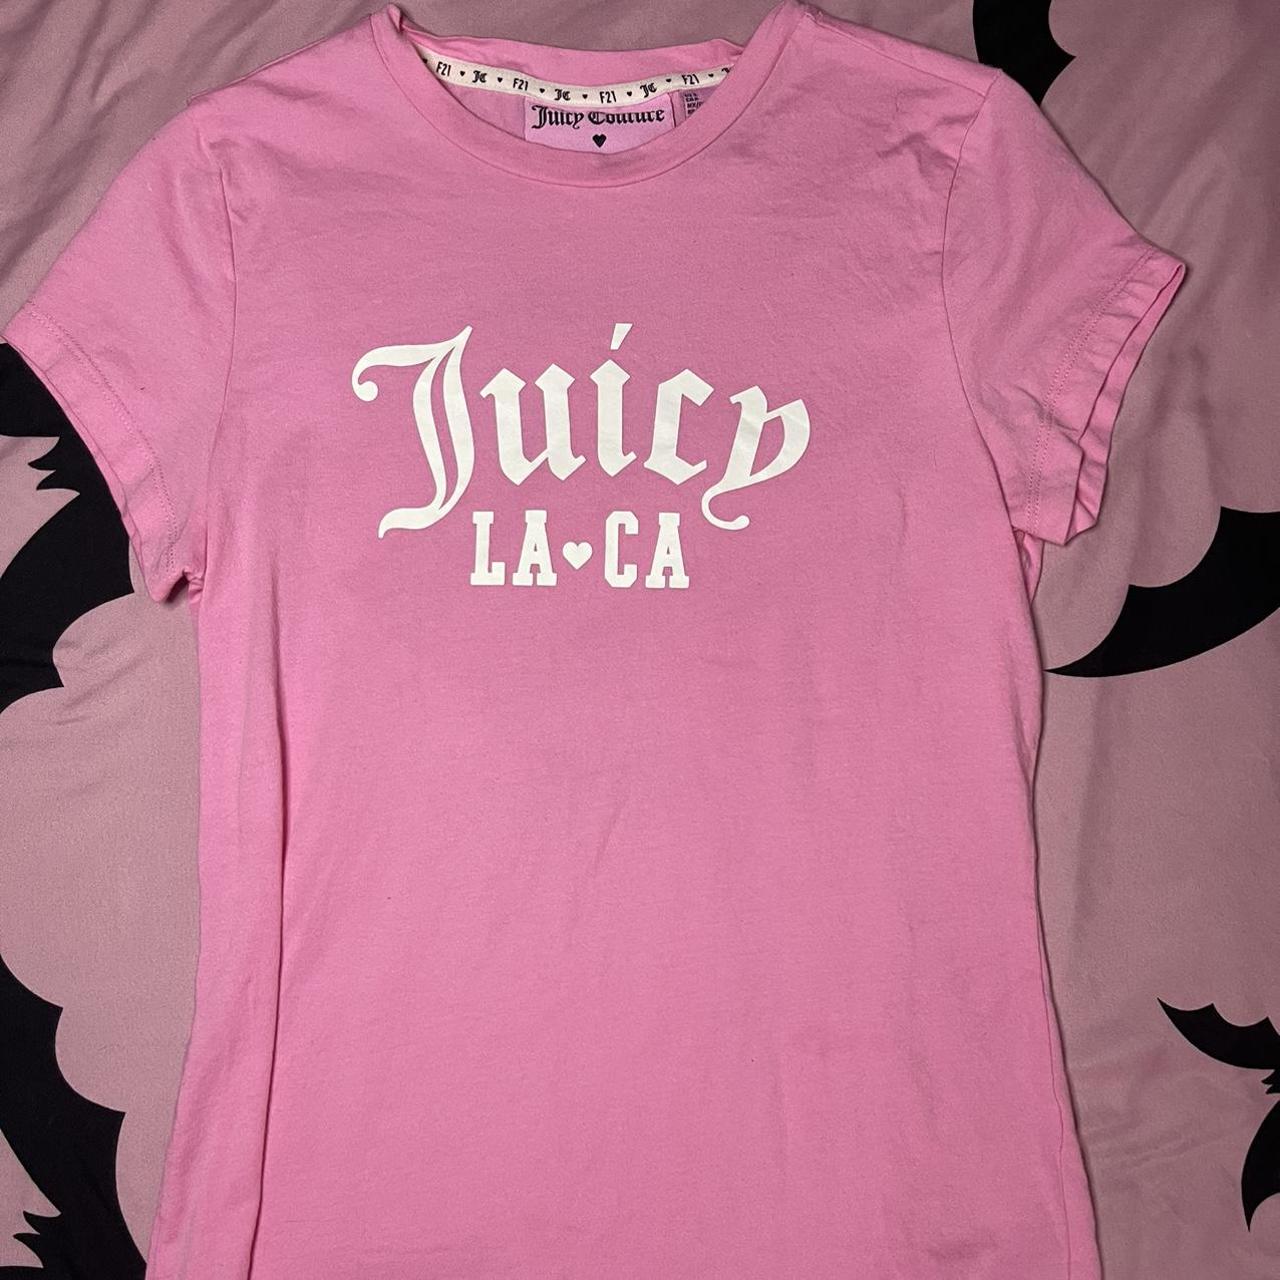 Juicy couture forever 21 t-shirt never worn pink - Depop